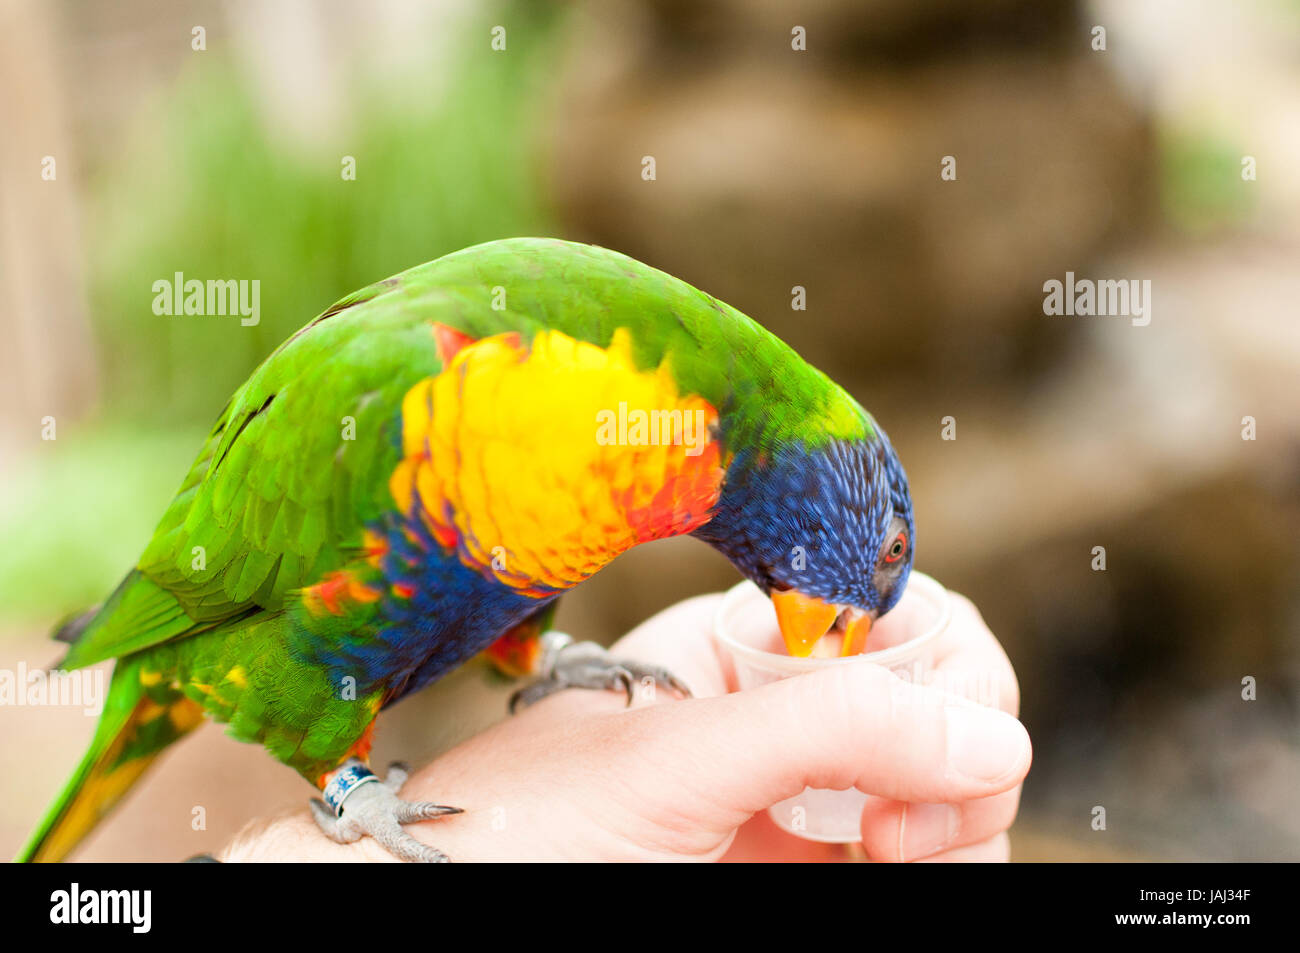 Rainbow lorikeet eating out of a hand Stock Photo